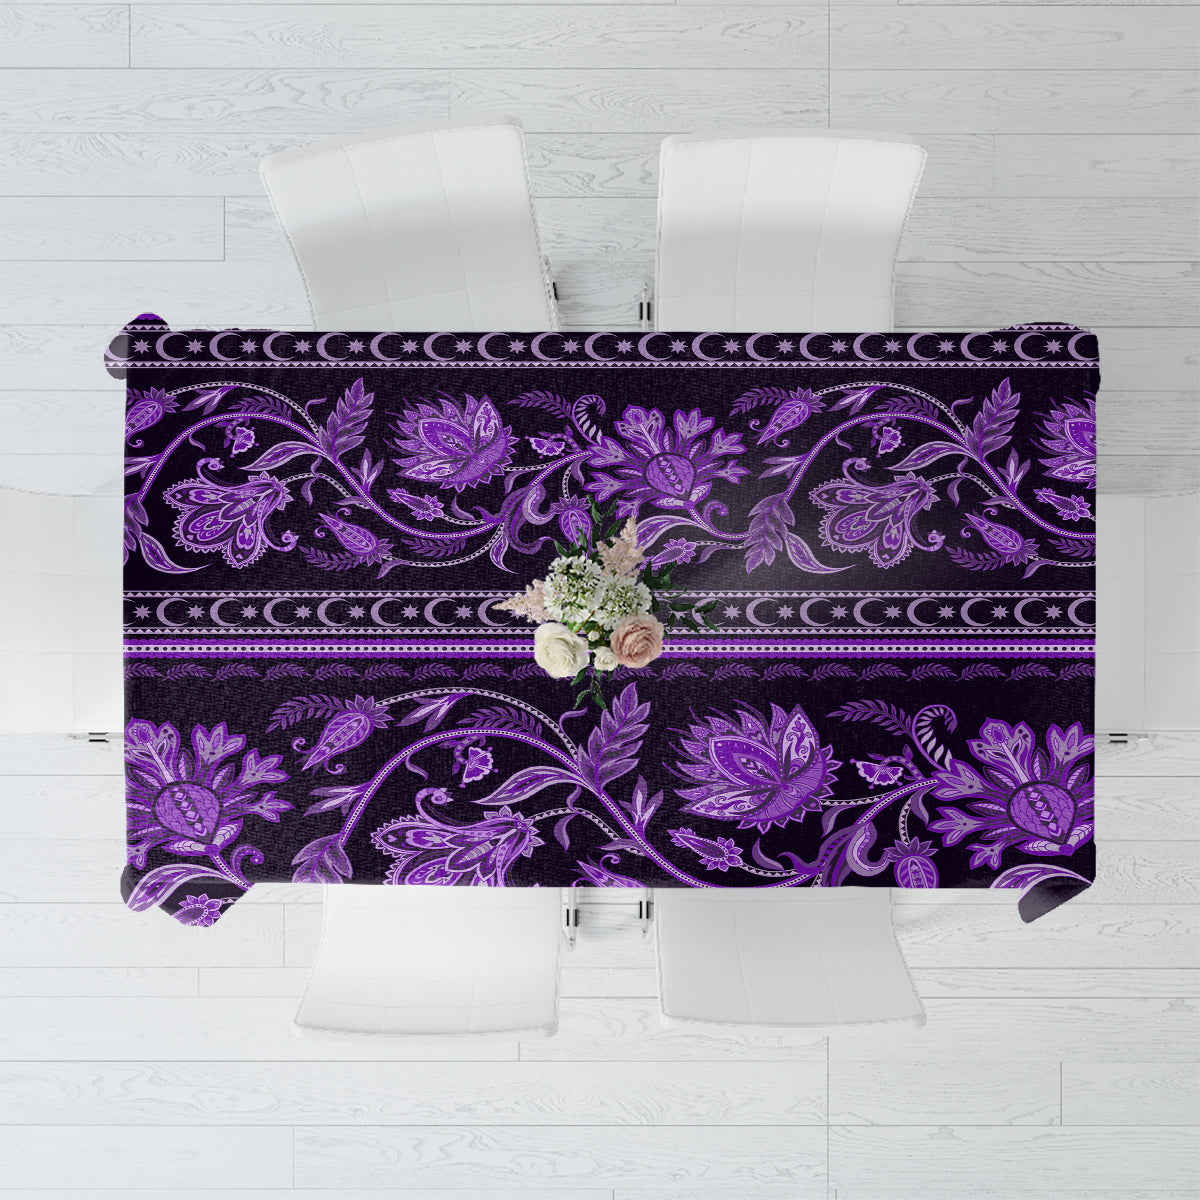 azerbaijan-tablecloth-traditional-pattern-ornament-with-flowers-buta-violet